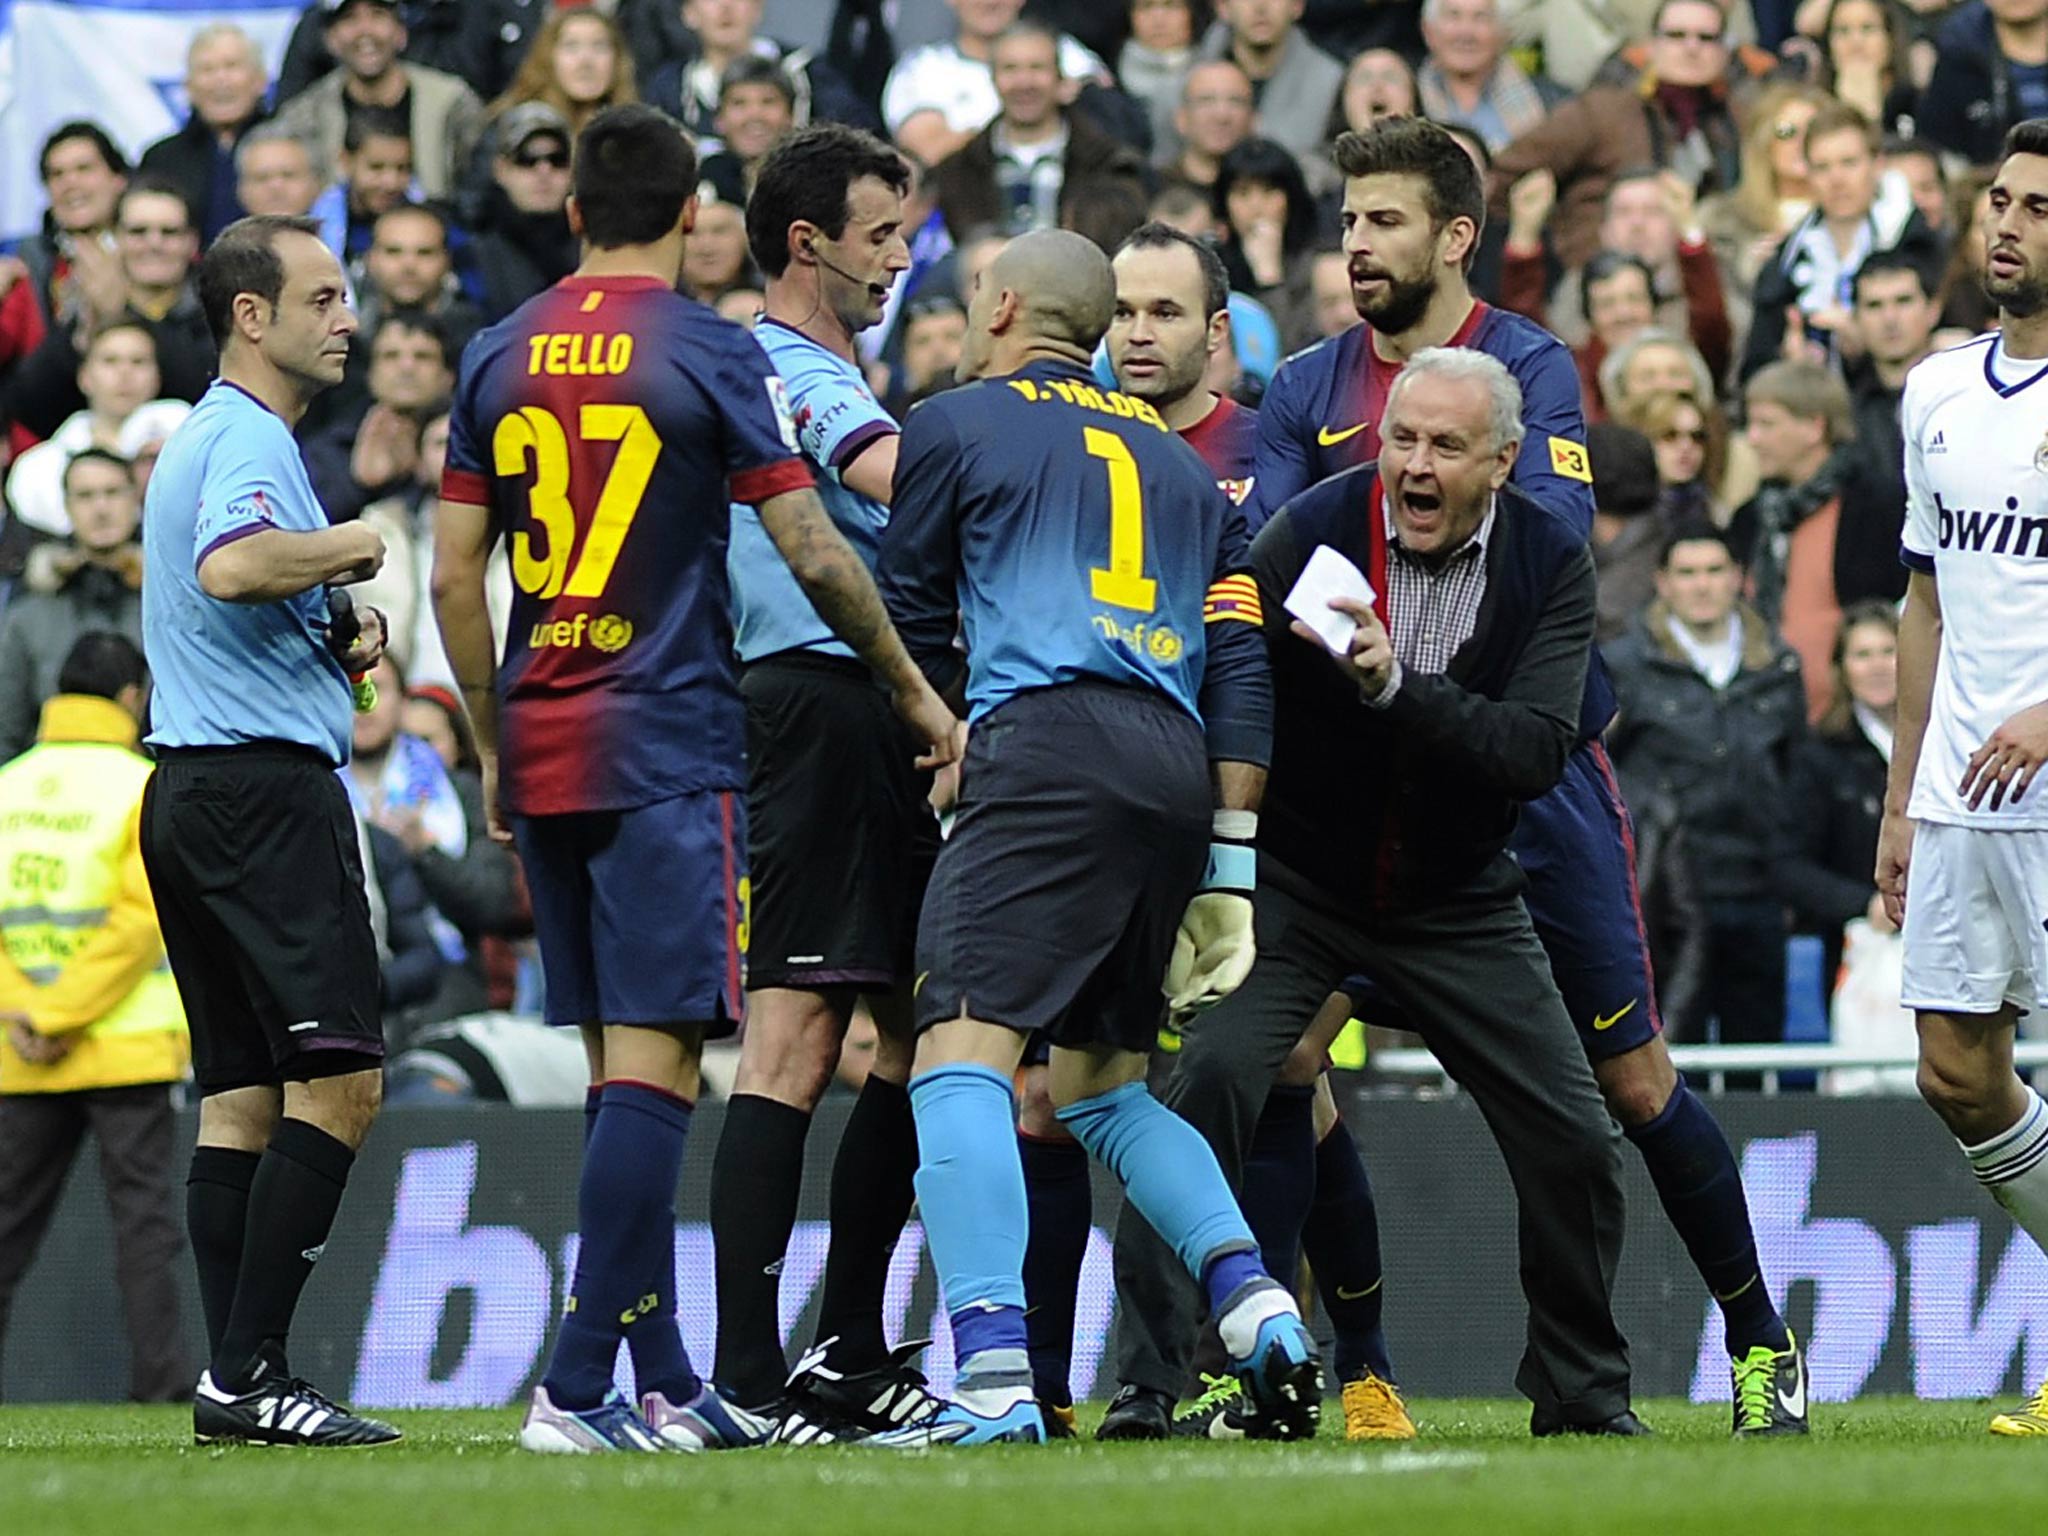 Victor Valdes confronts the referee